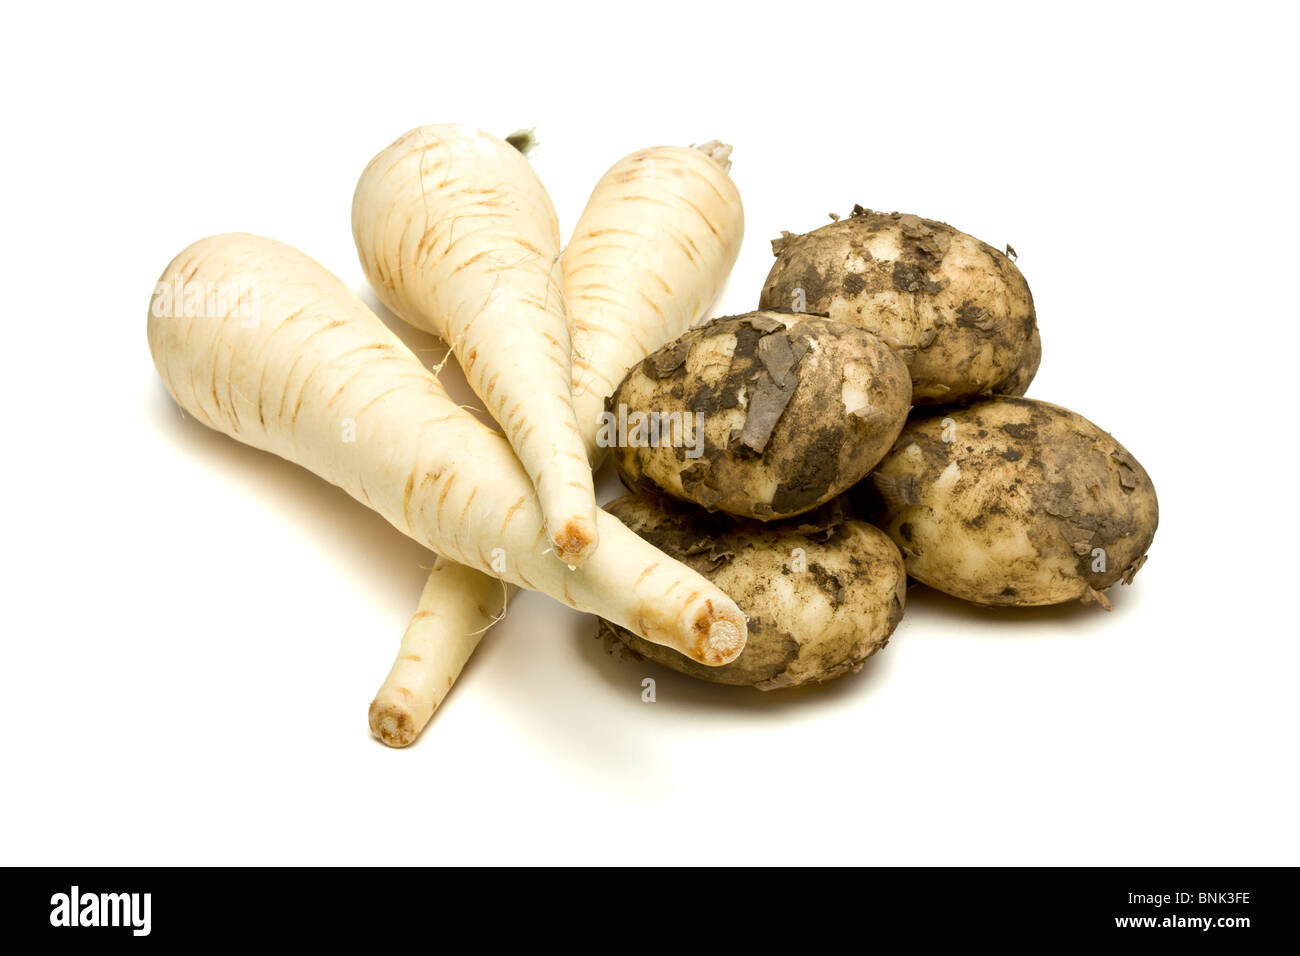 Root vegetables of Parsnip and New Potatoes from low perspective isolated against white background. Stock Photo